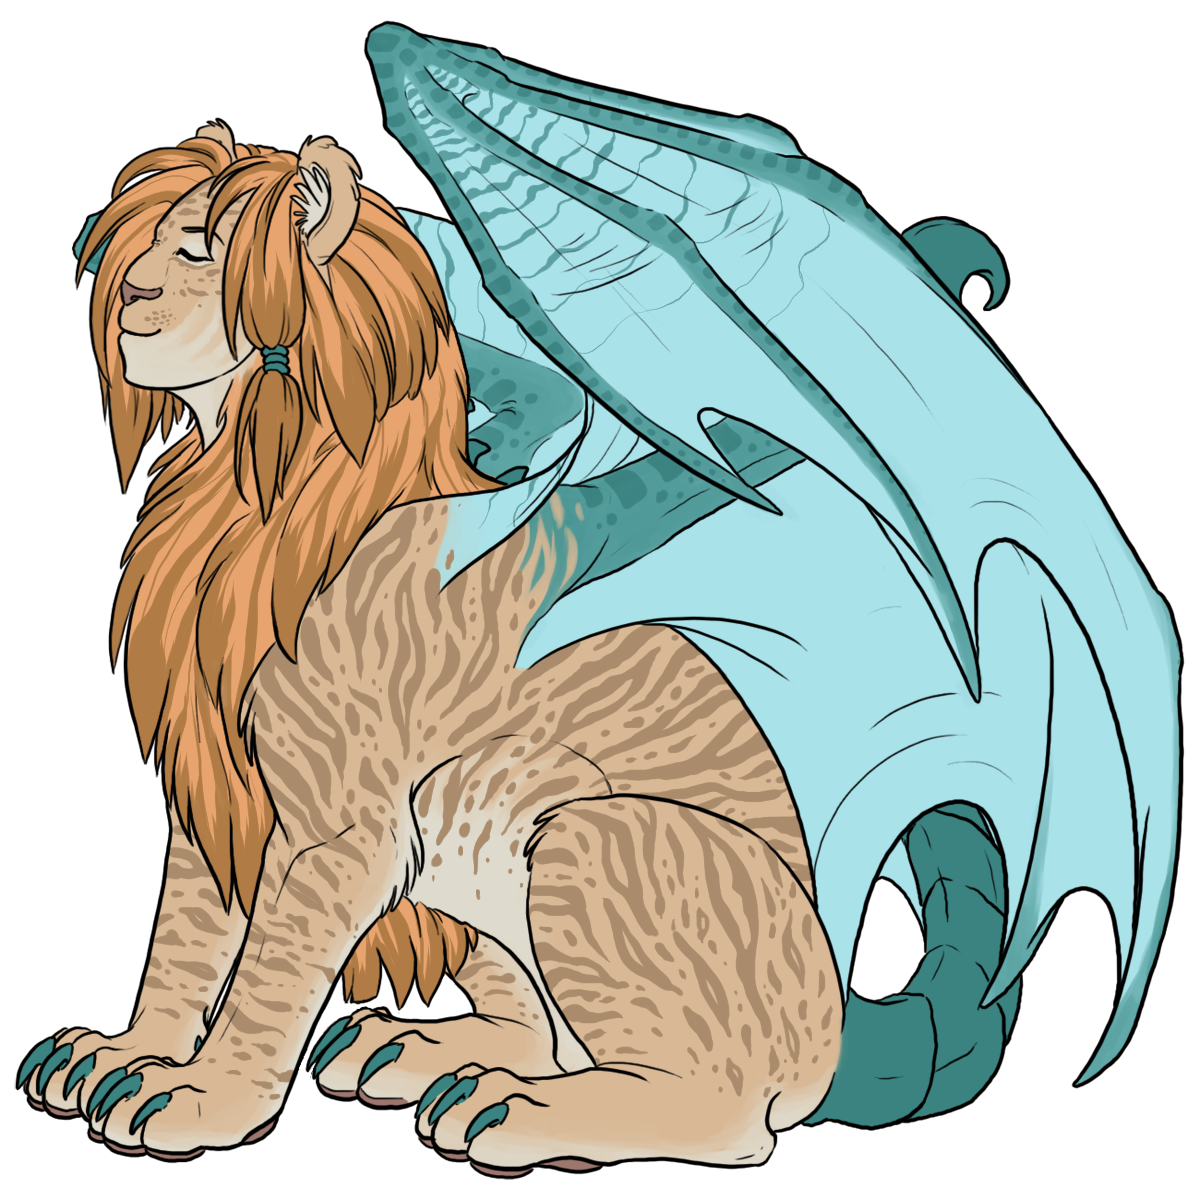 manticore_contest_by_seadragon06-d9i8bkt.png